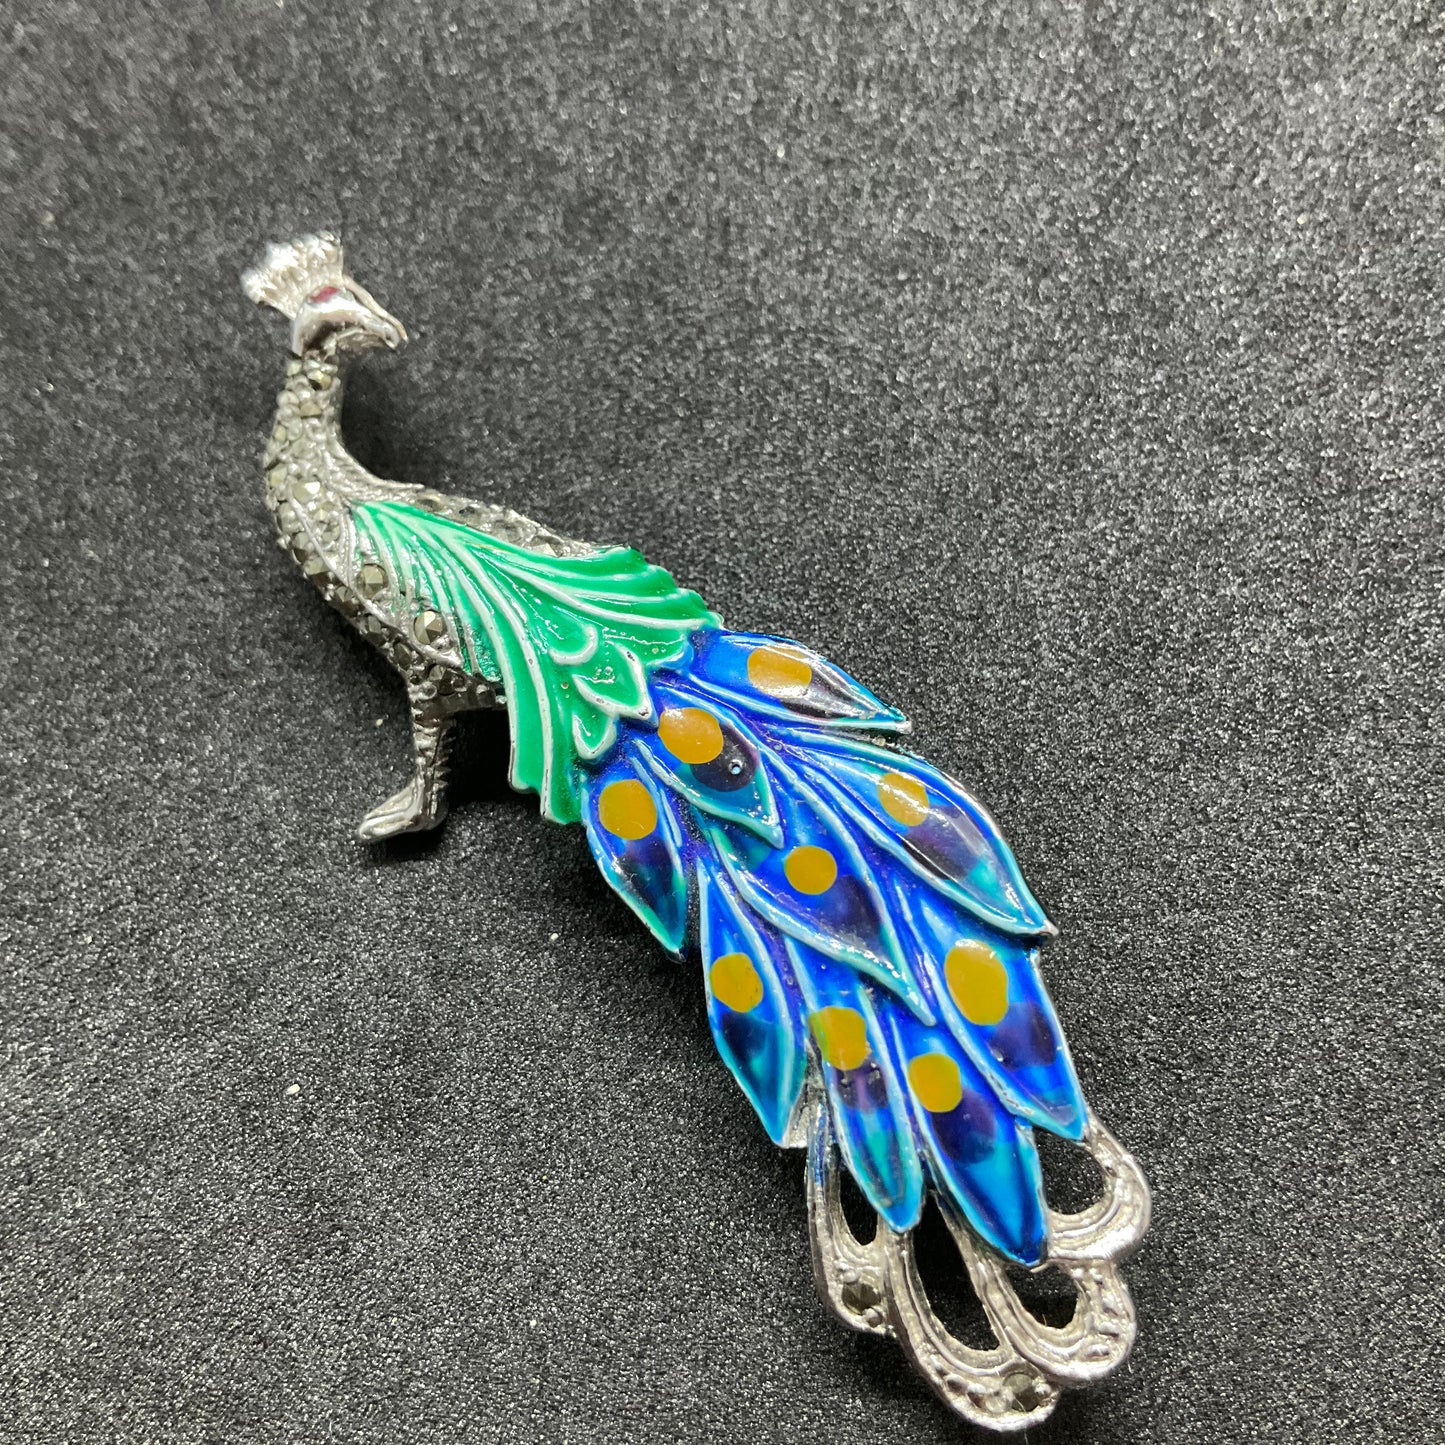 Vintage 1940s Bohemian Enamel and Marcasite Colourful Peacock Brooch